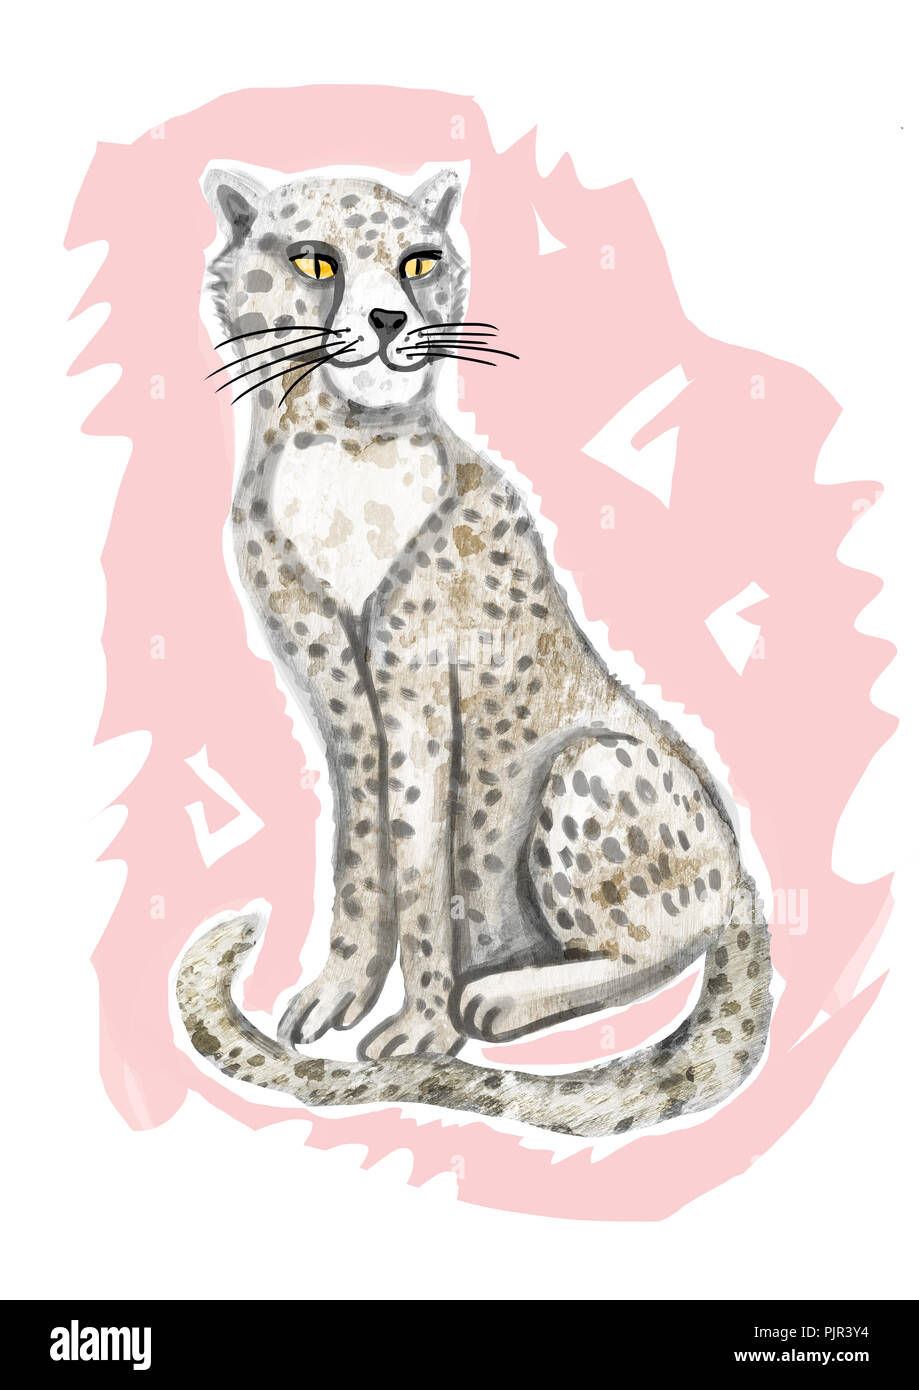 The cheetah is painted in a raster. Isolated picture on a light pink circle. Stock Photo